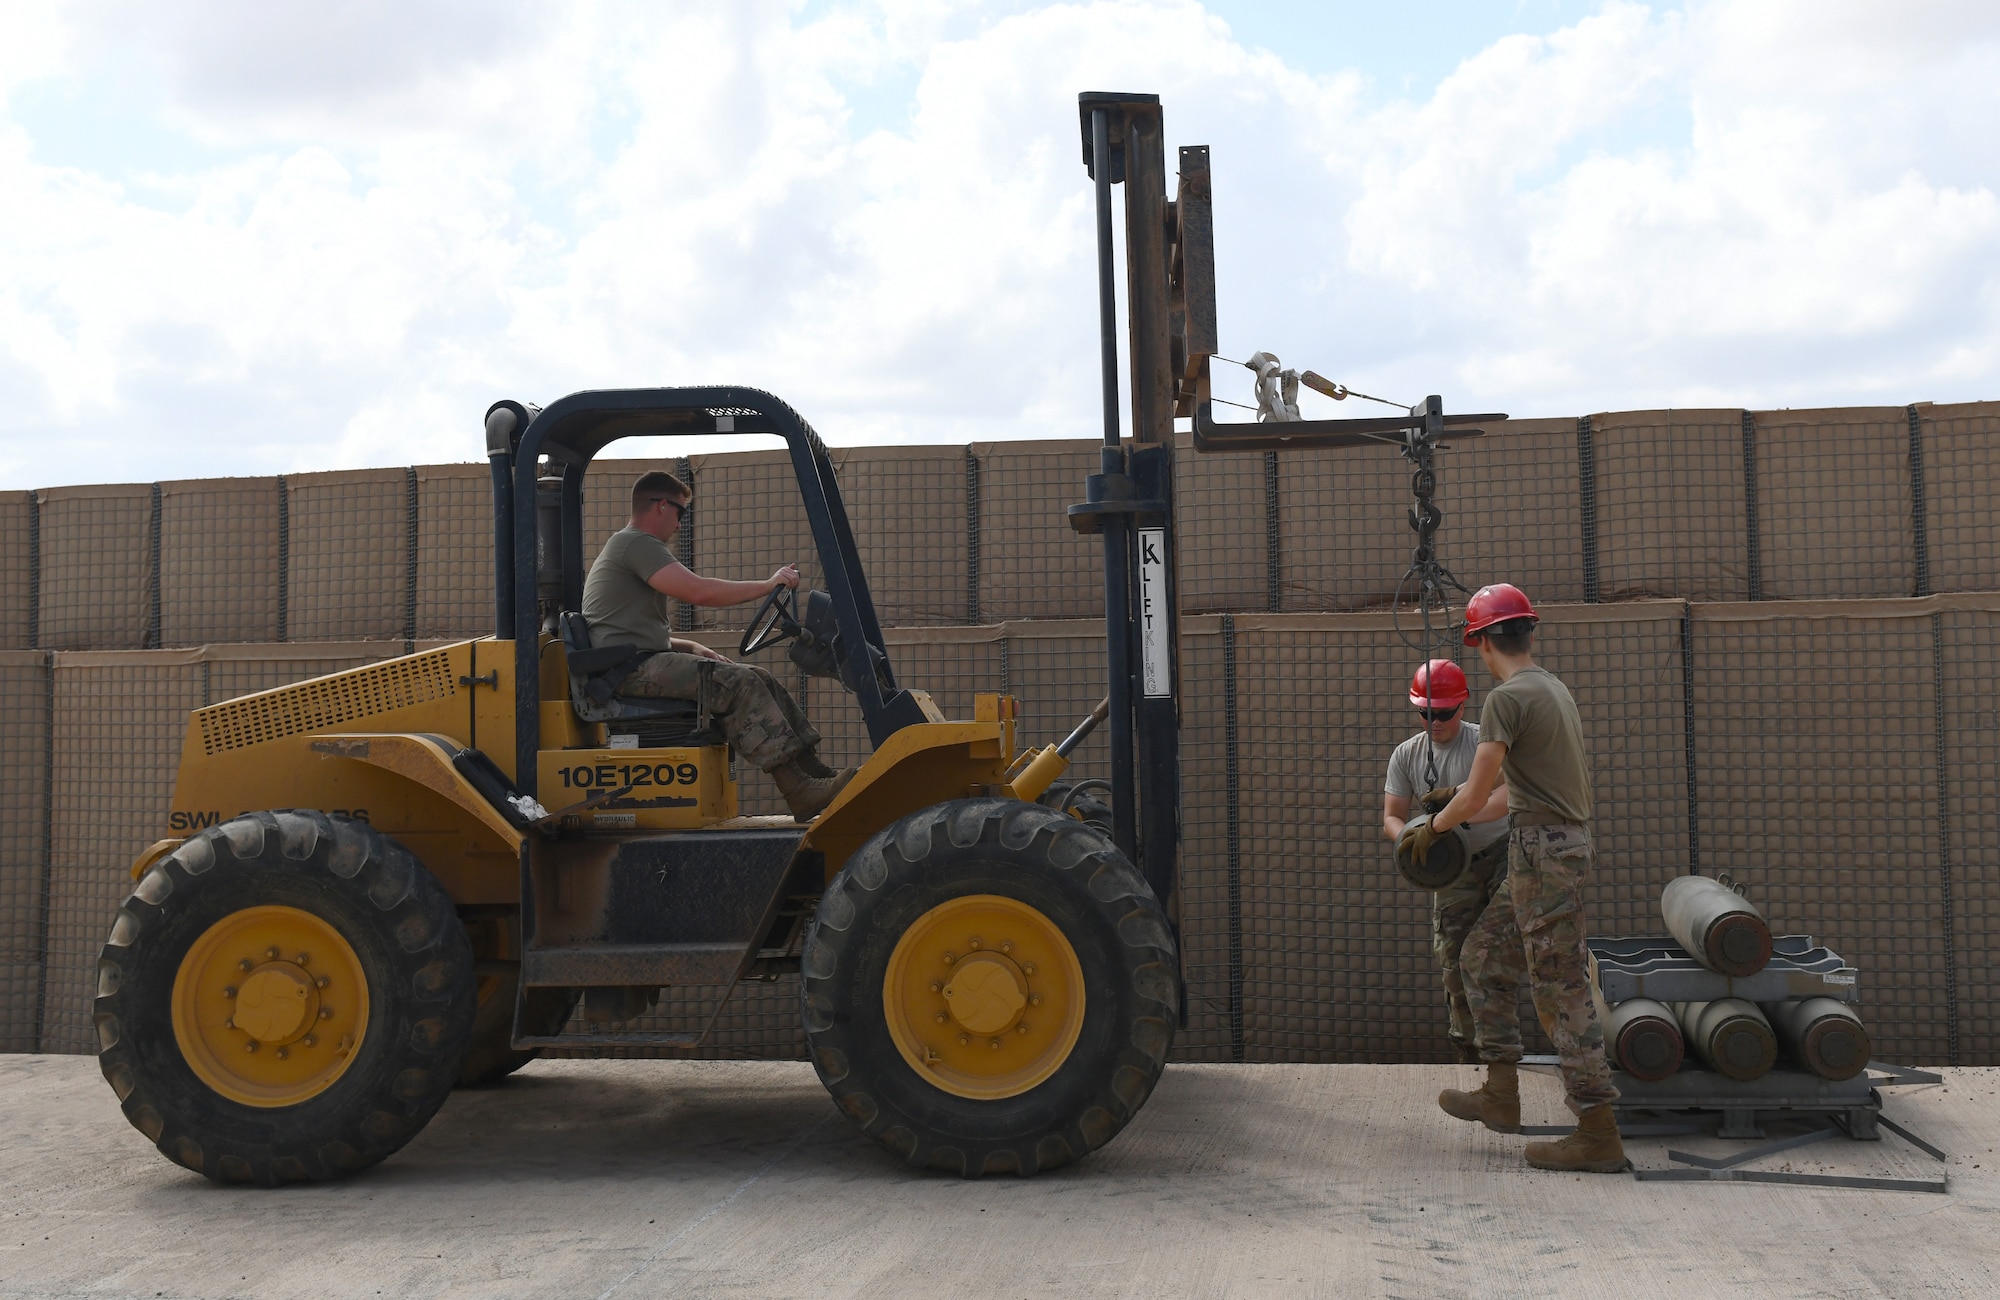 U.S. Air Force munitions crew chiefs assigned to the 726th Expeditionary Air Base Squadron use a forklift to transfer munitions parts during a bomb build at Chabelley Airfield, Djibouti, Nov. 12, 2019. The 726th EABS Munitions Systems Airmen build, inspect and store all munitions at the airfield, ensuring mission effectiveness at a moment’s notice. (U.S. Air Force photo by Staff Sgt. Alex Fox Echols III)